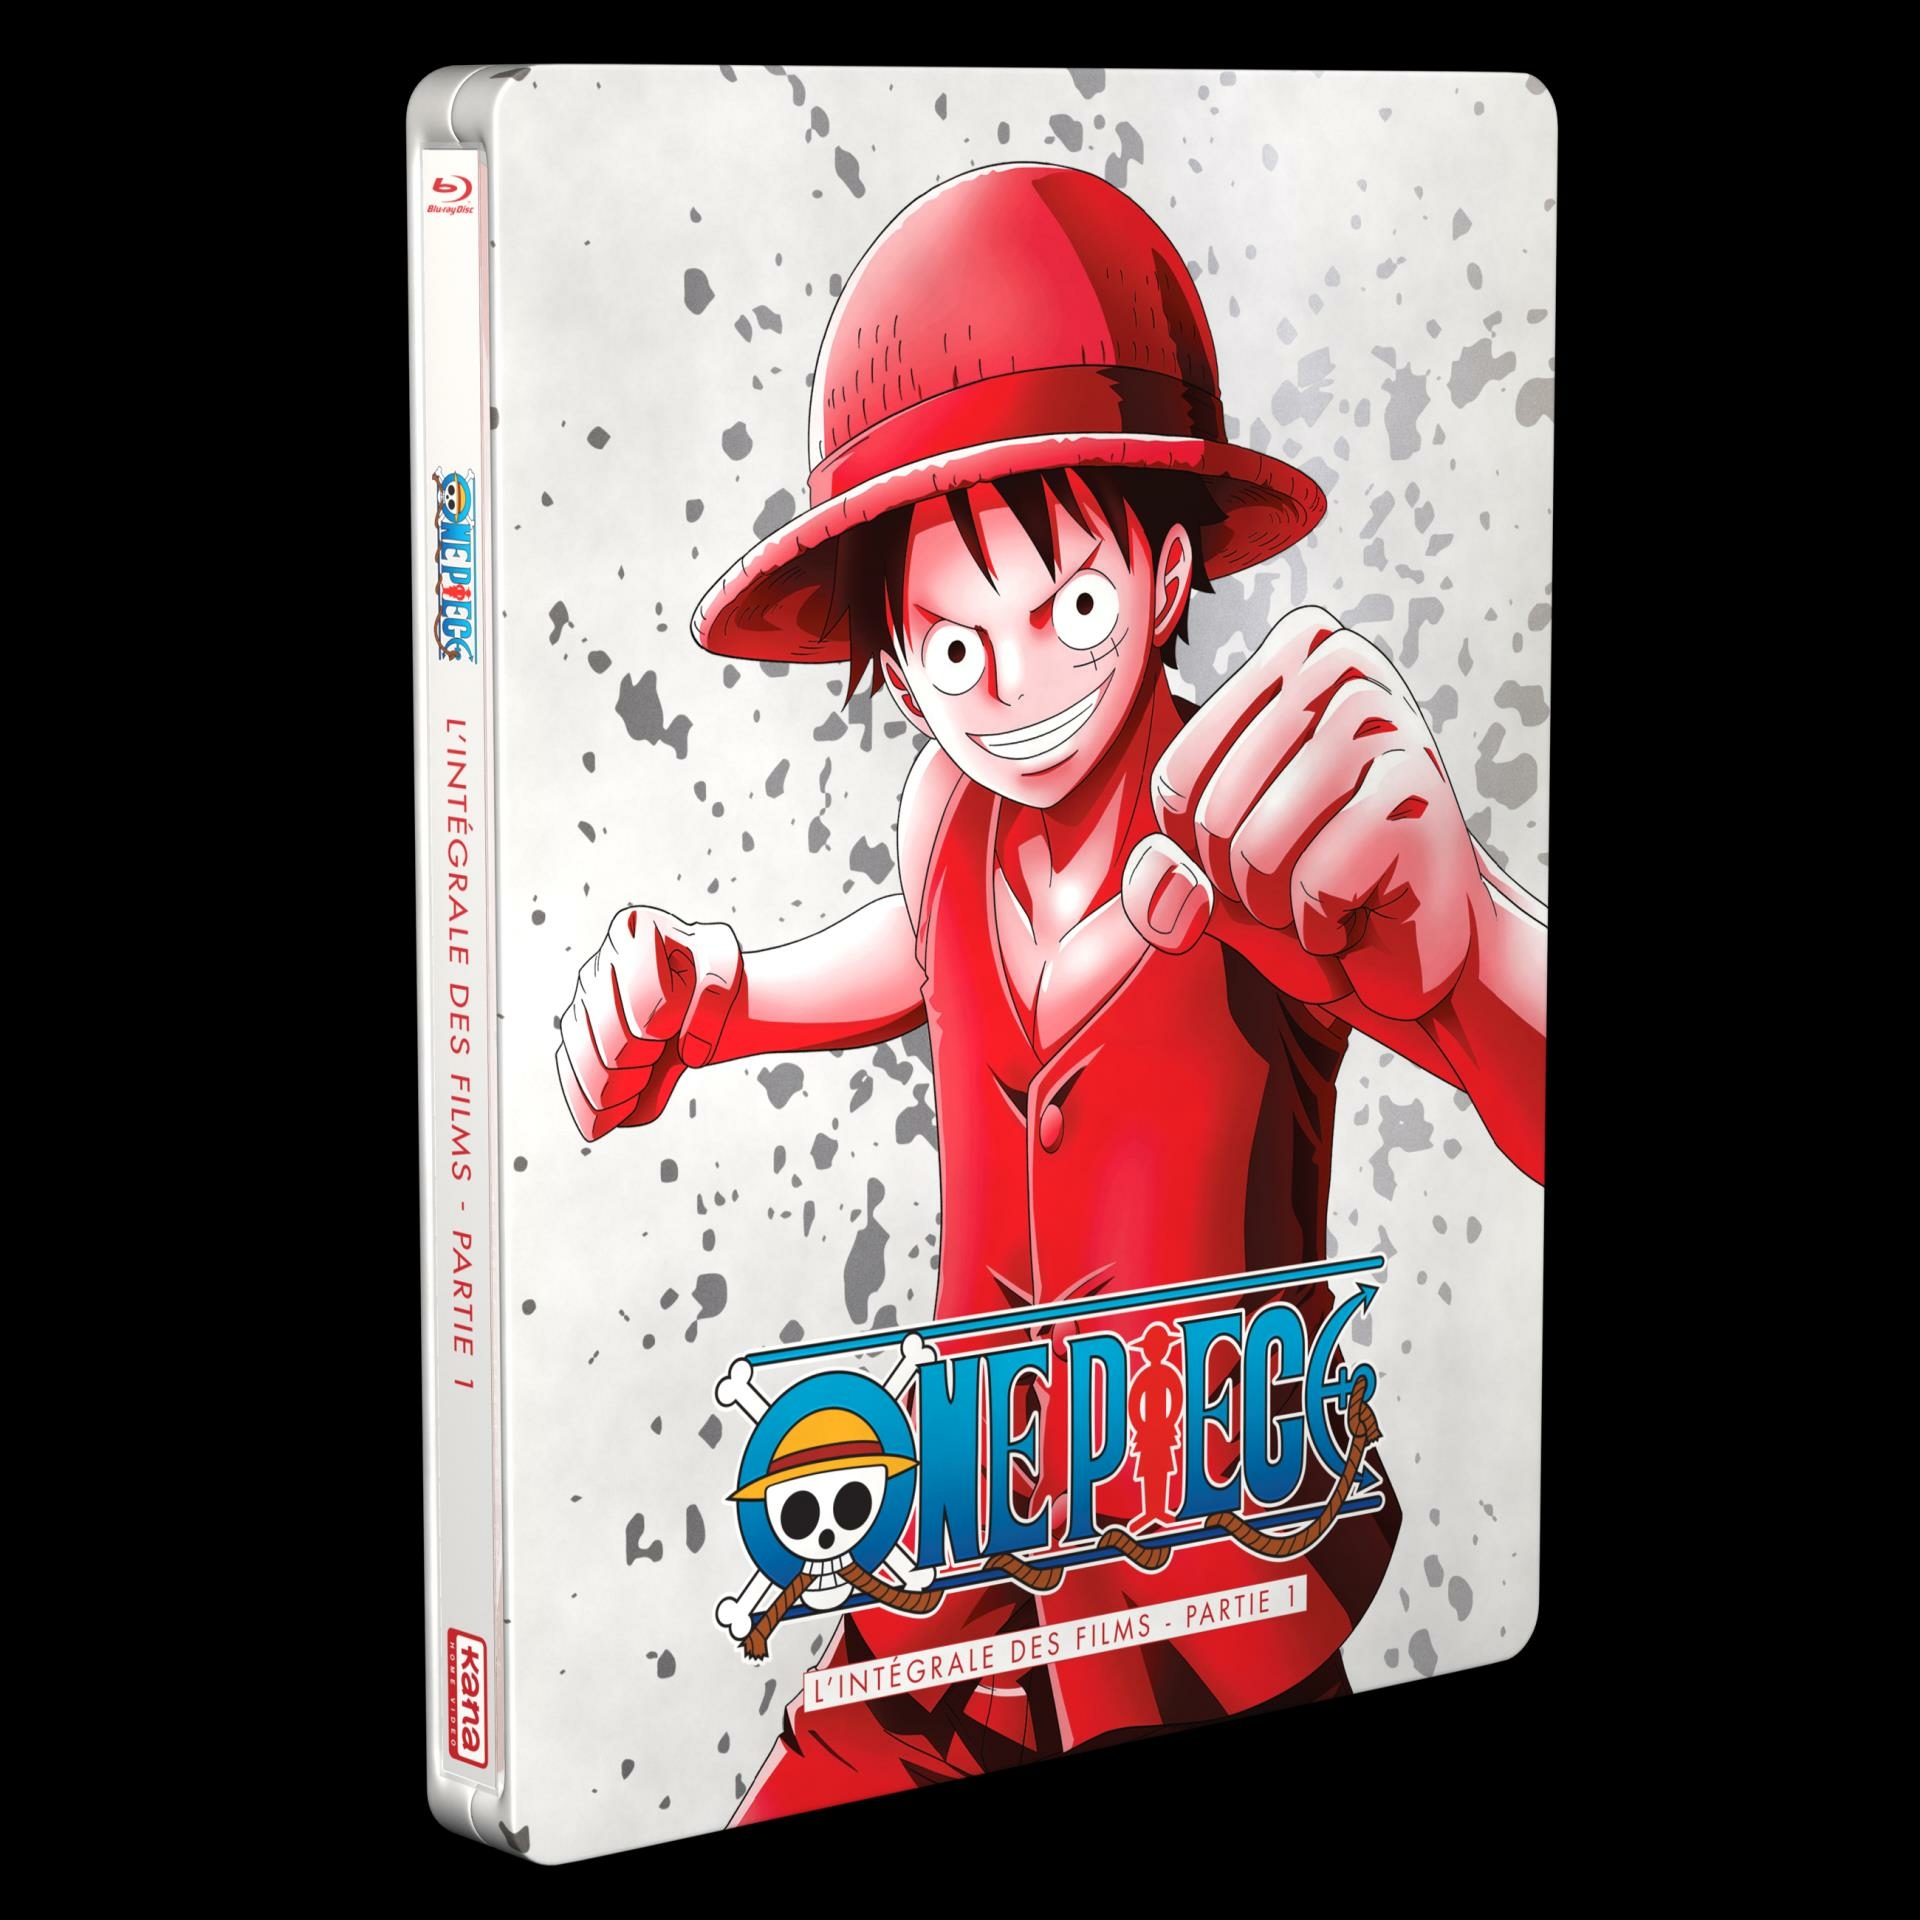 One Piece Films Coffret 1 Edition Limitee Steelbook ?format=product Cover Large&k=1653370507